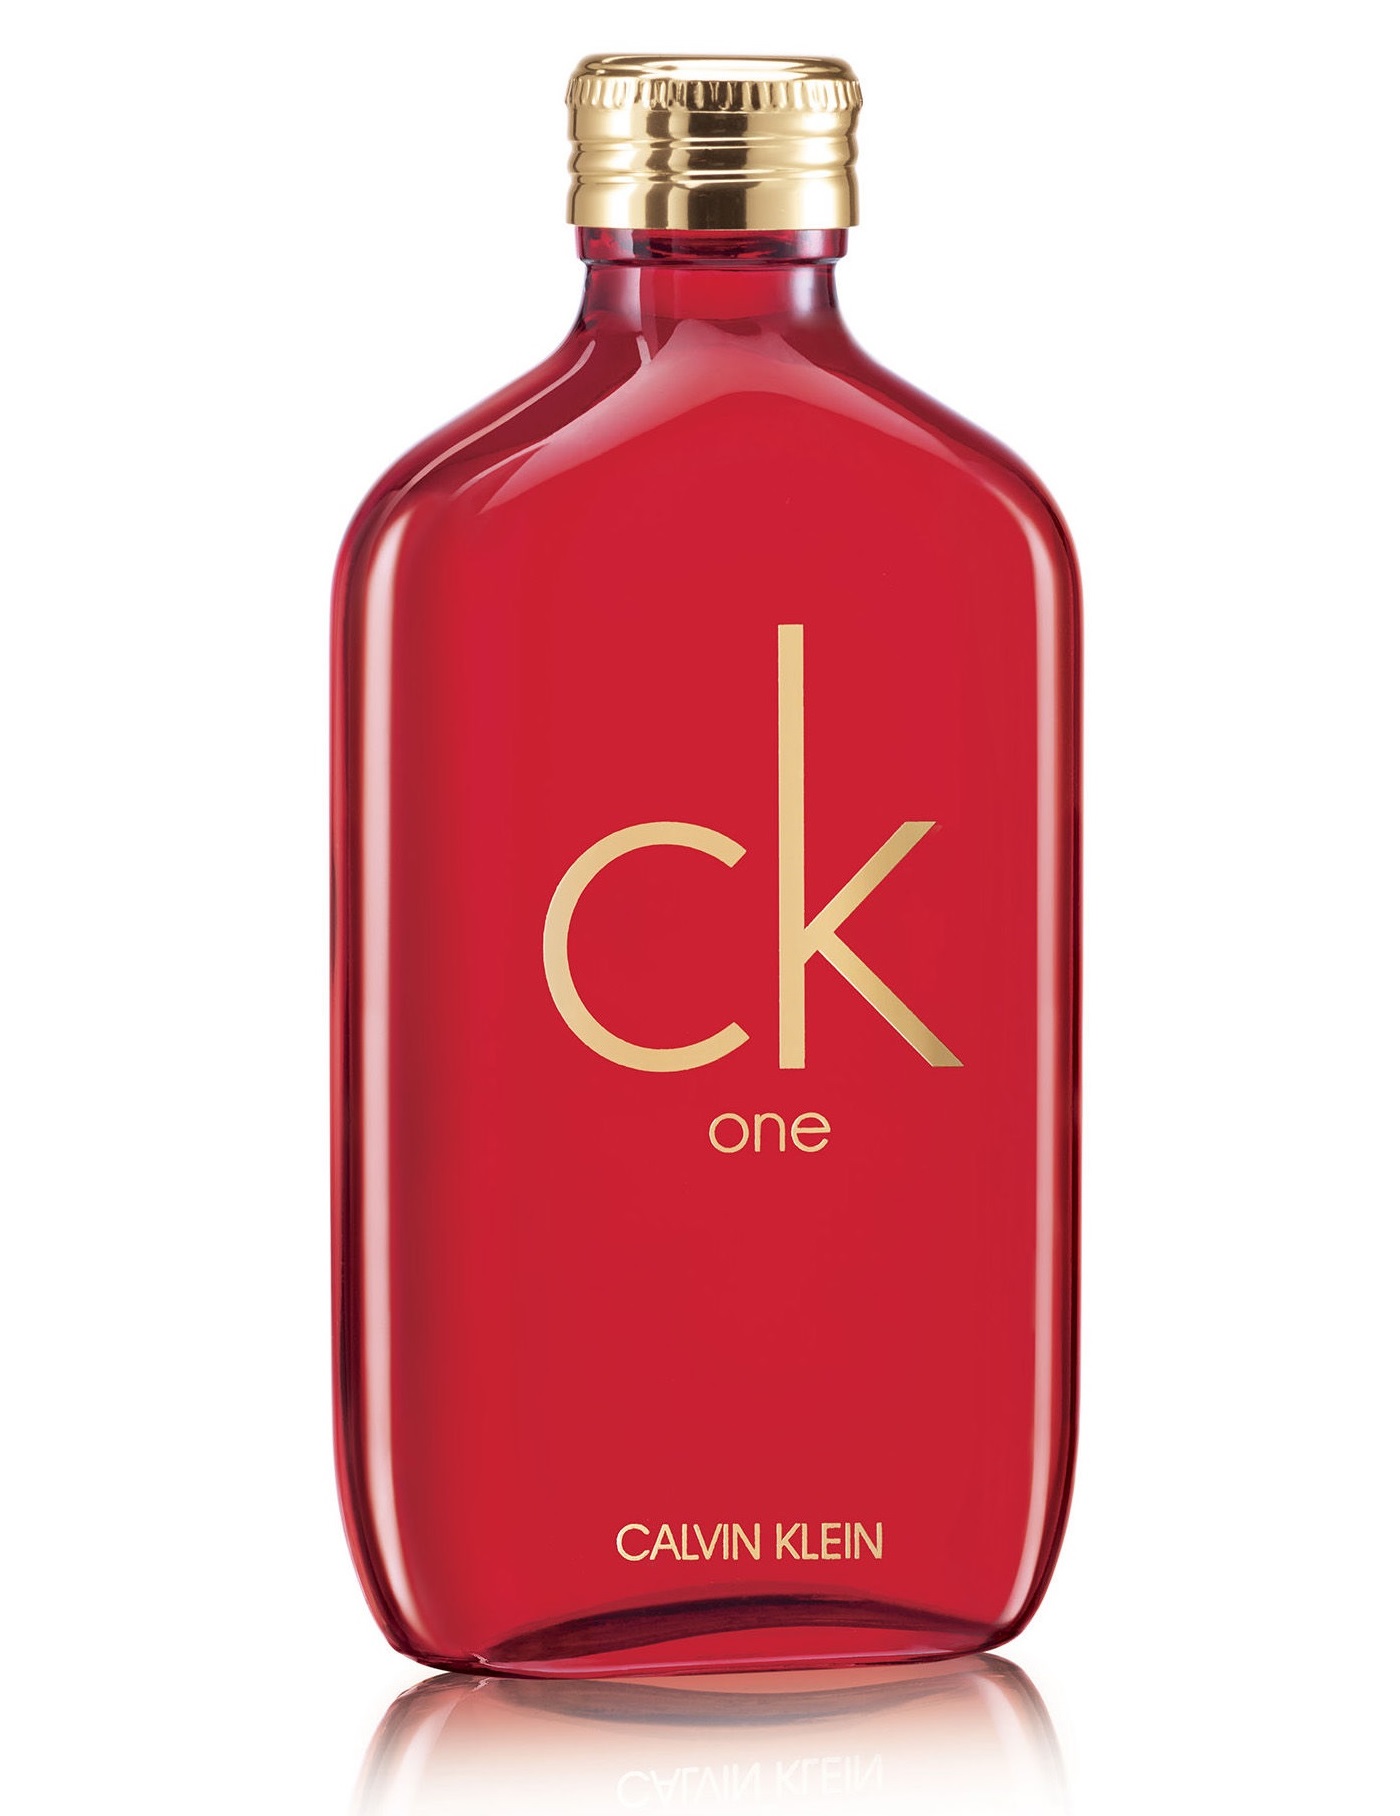 ck products